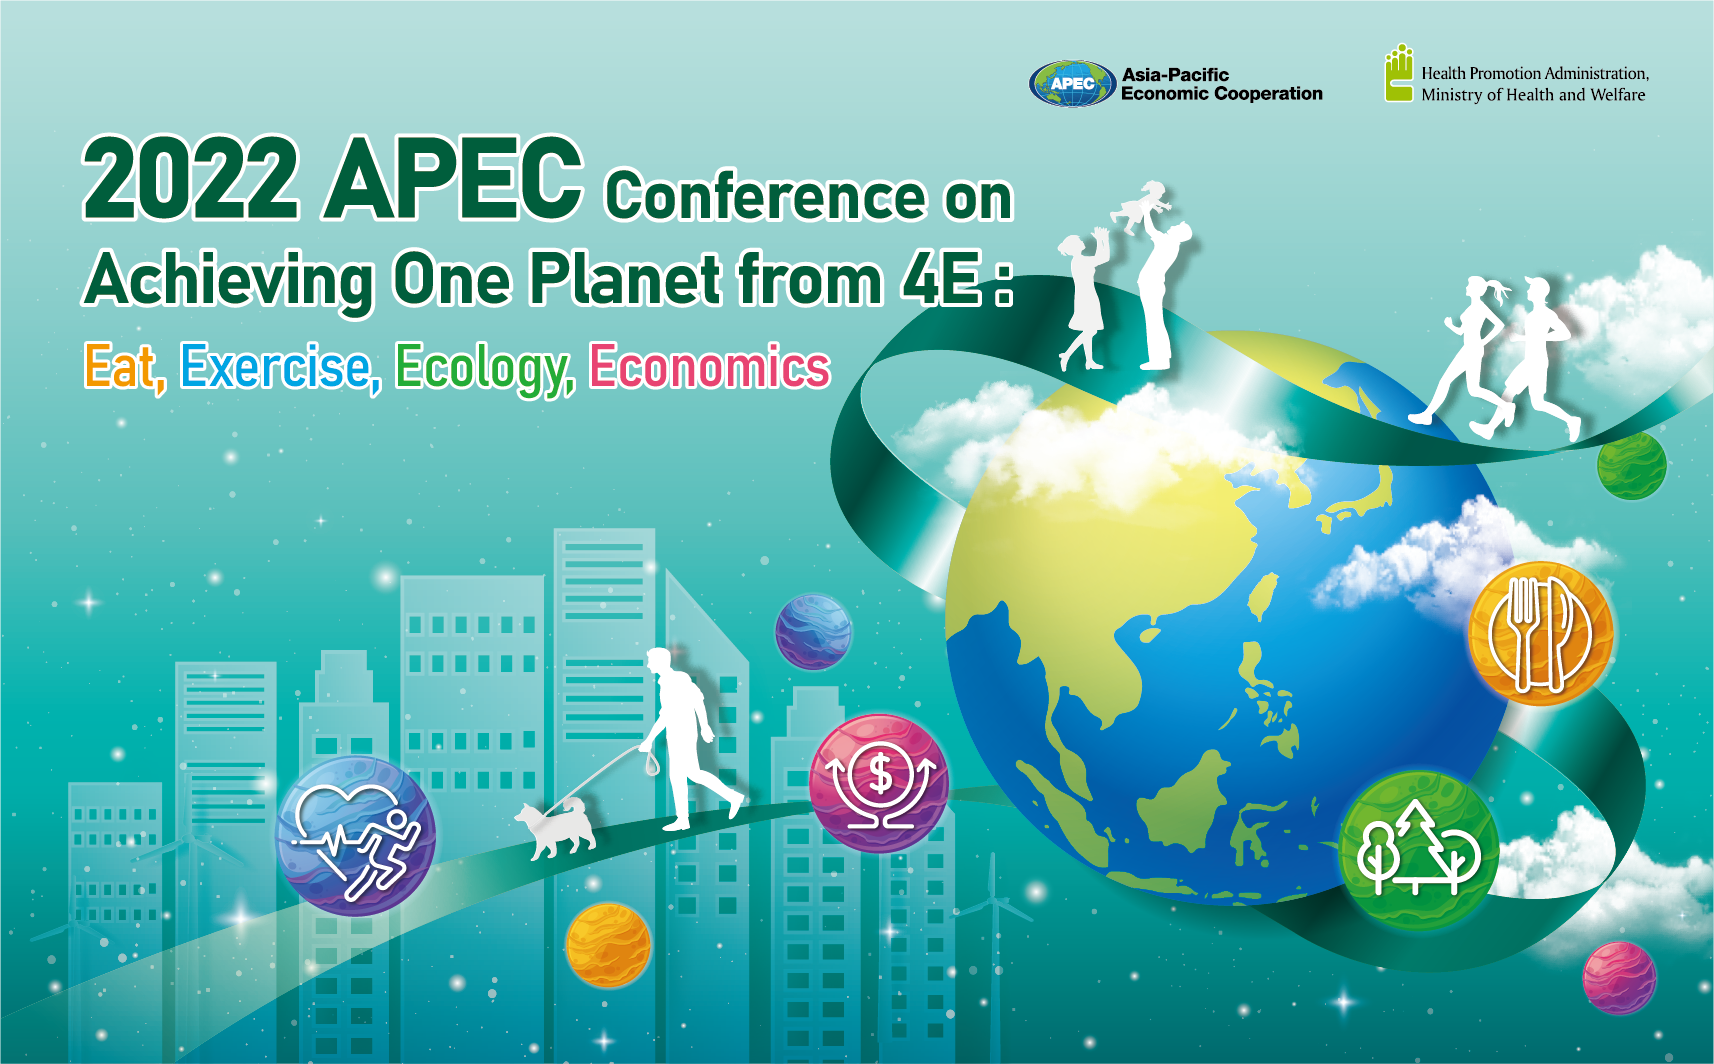 APEC Conference on Achieving One Planet from 4E: Eat, Exercise, Ecology, Economics